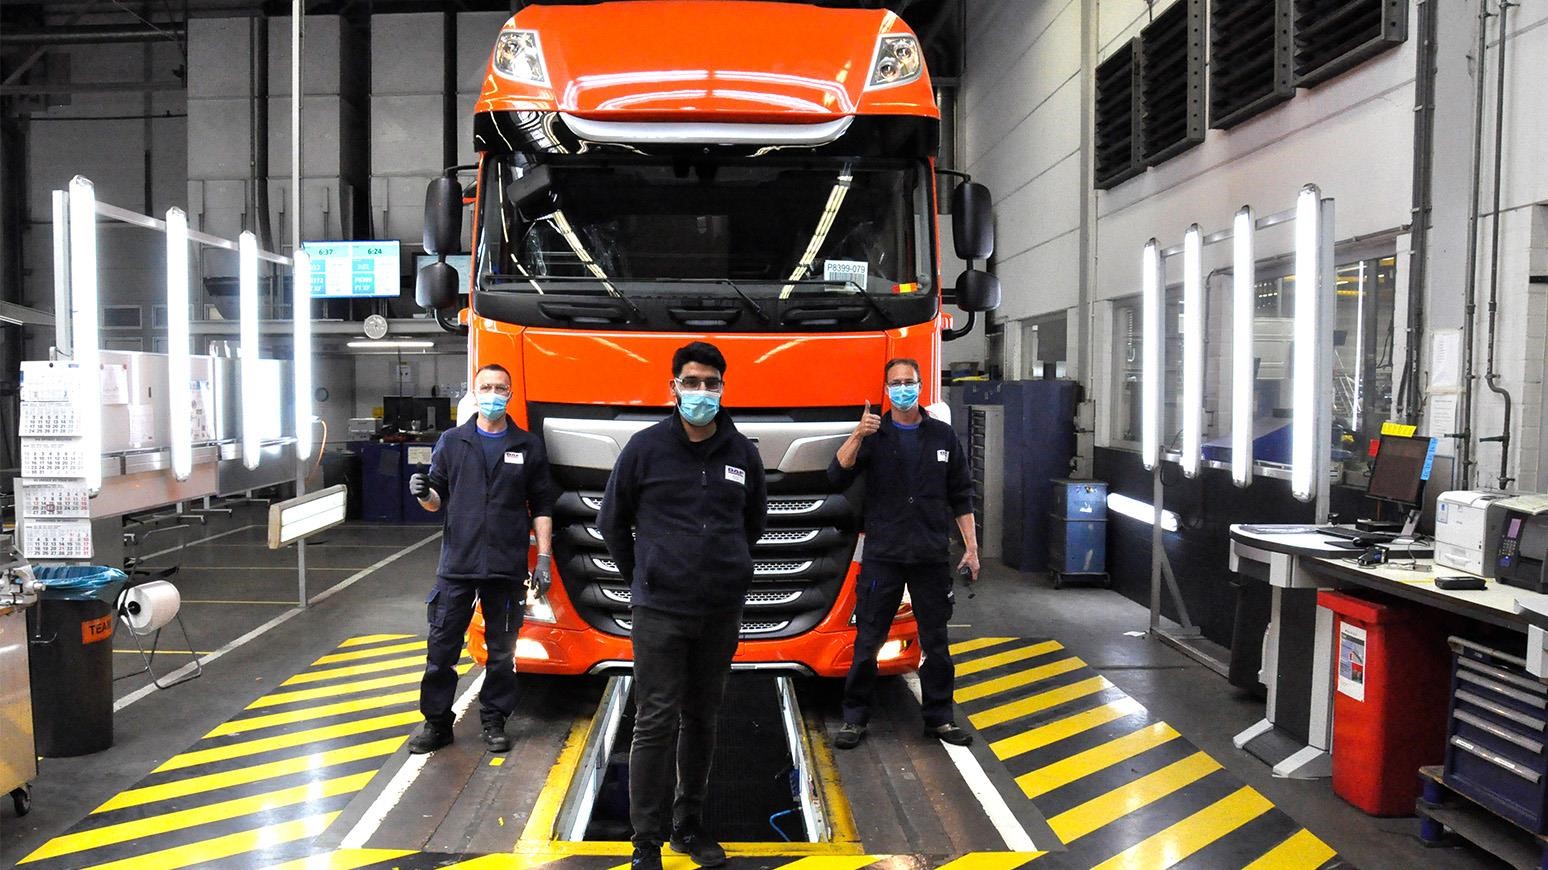 DAF Restarts Truck Production At Manufacturing Plants In Belgium, The Netherlands & The UK